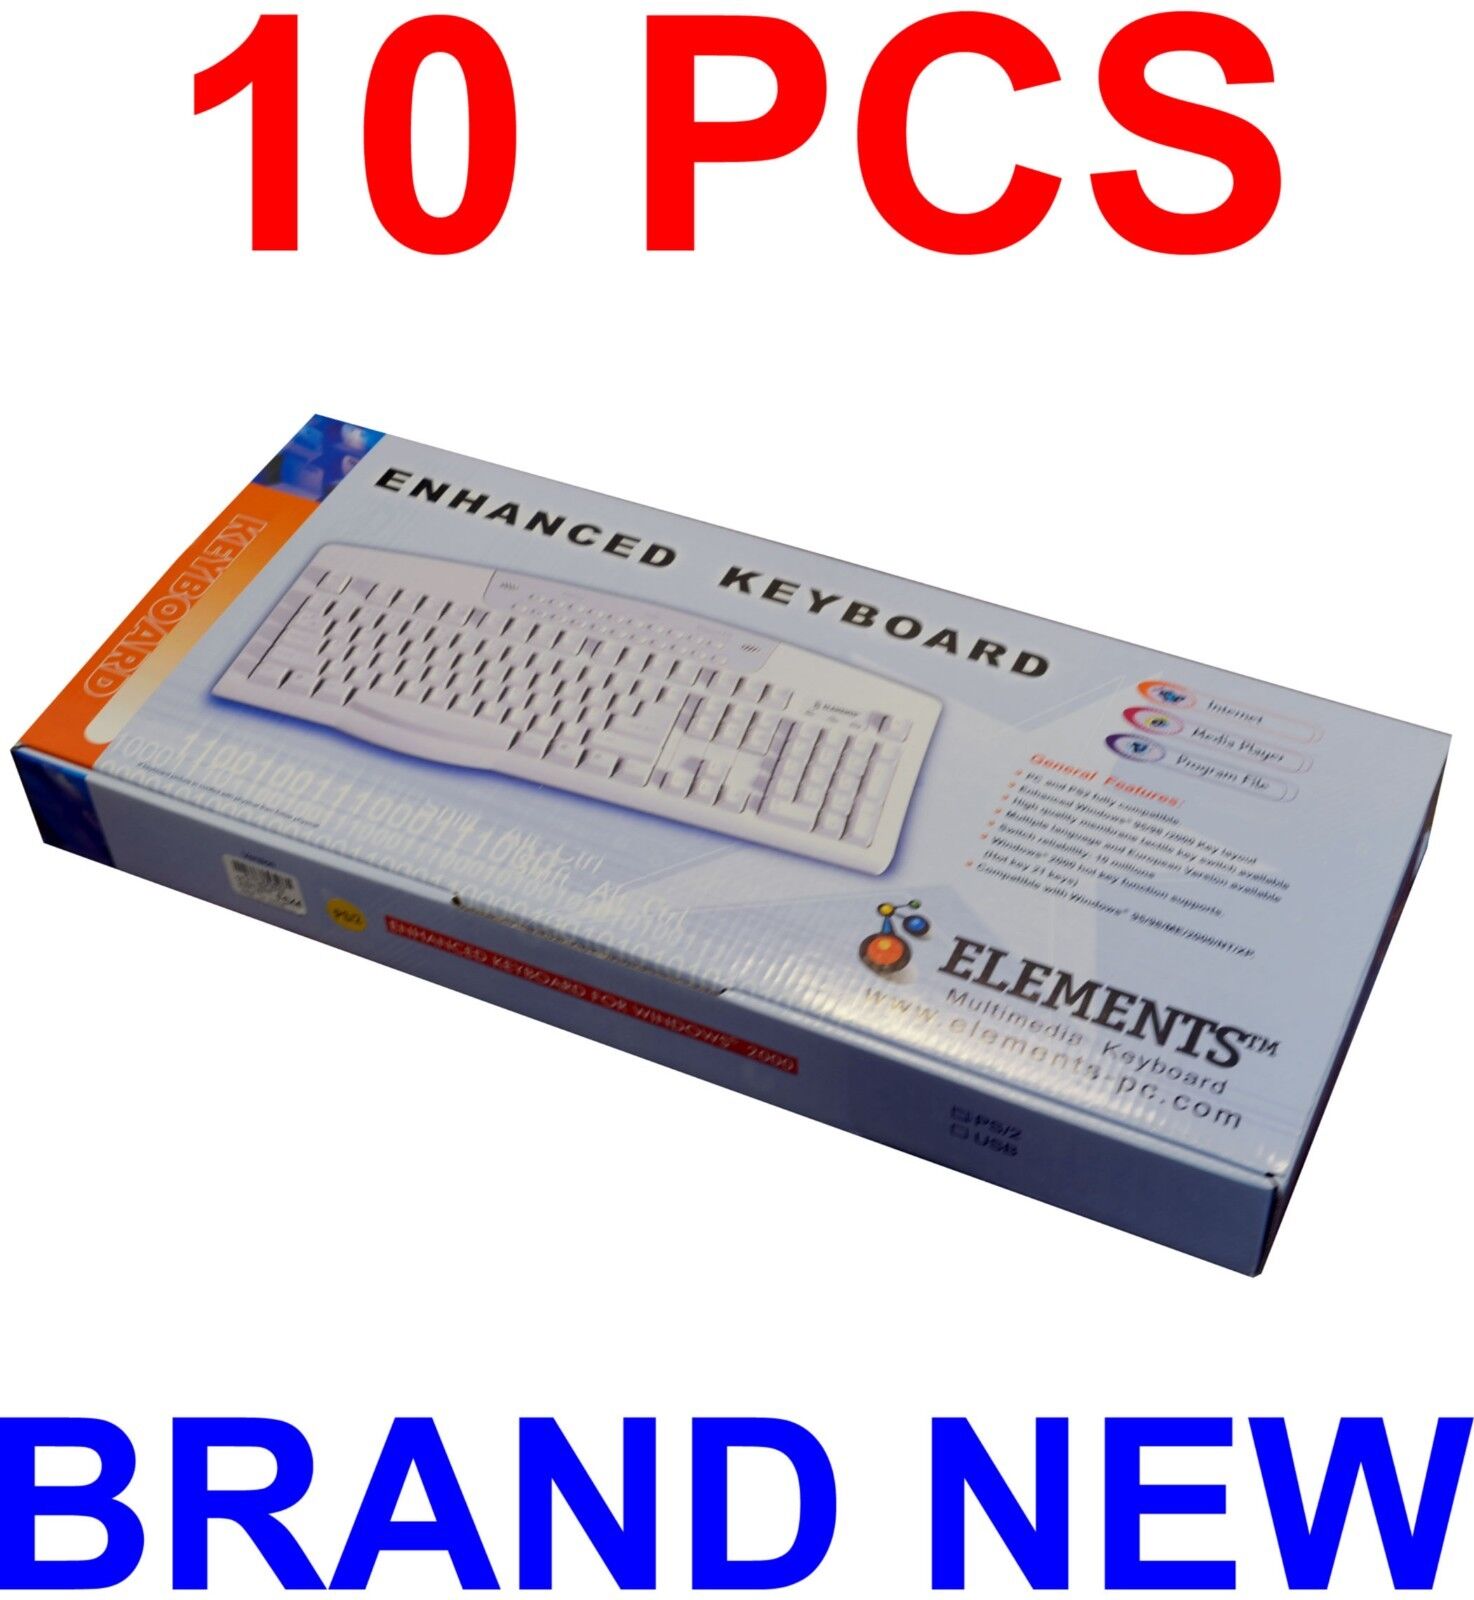 (Lot of 10) ELEMENTS Enhanced Multimedia PS2 White Color Keyboard 